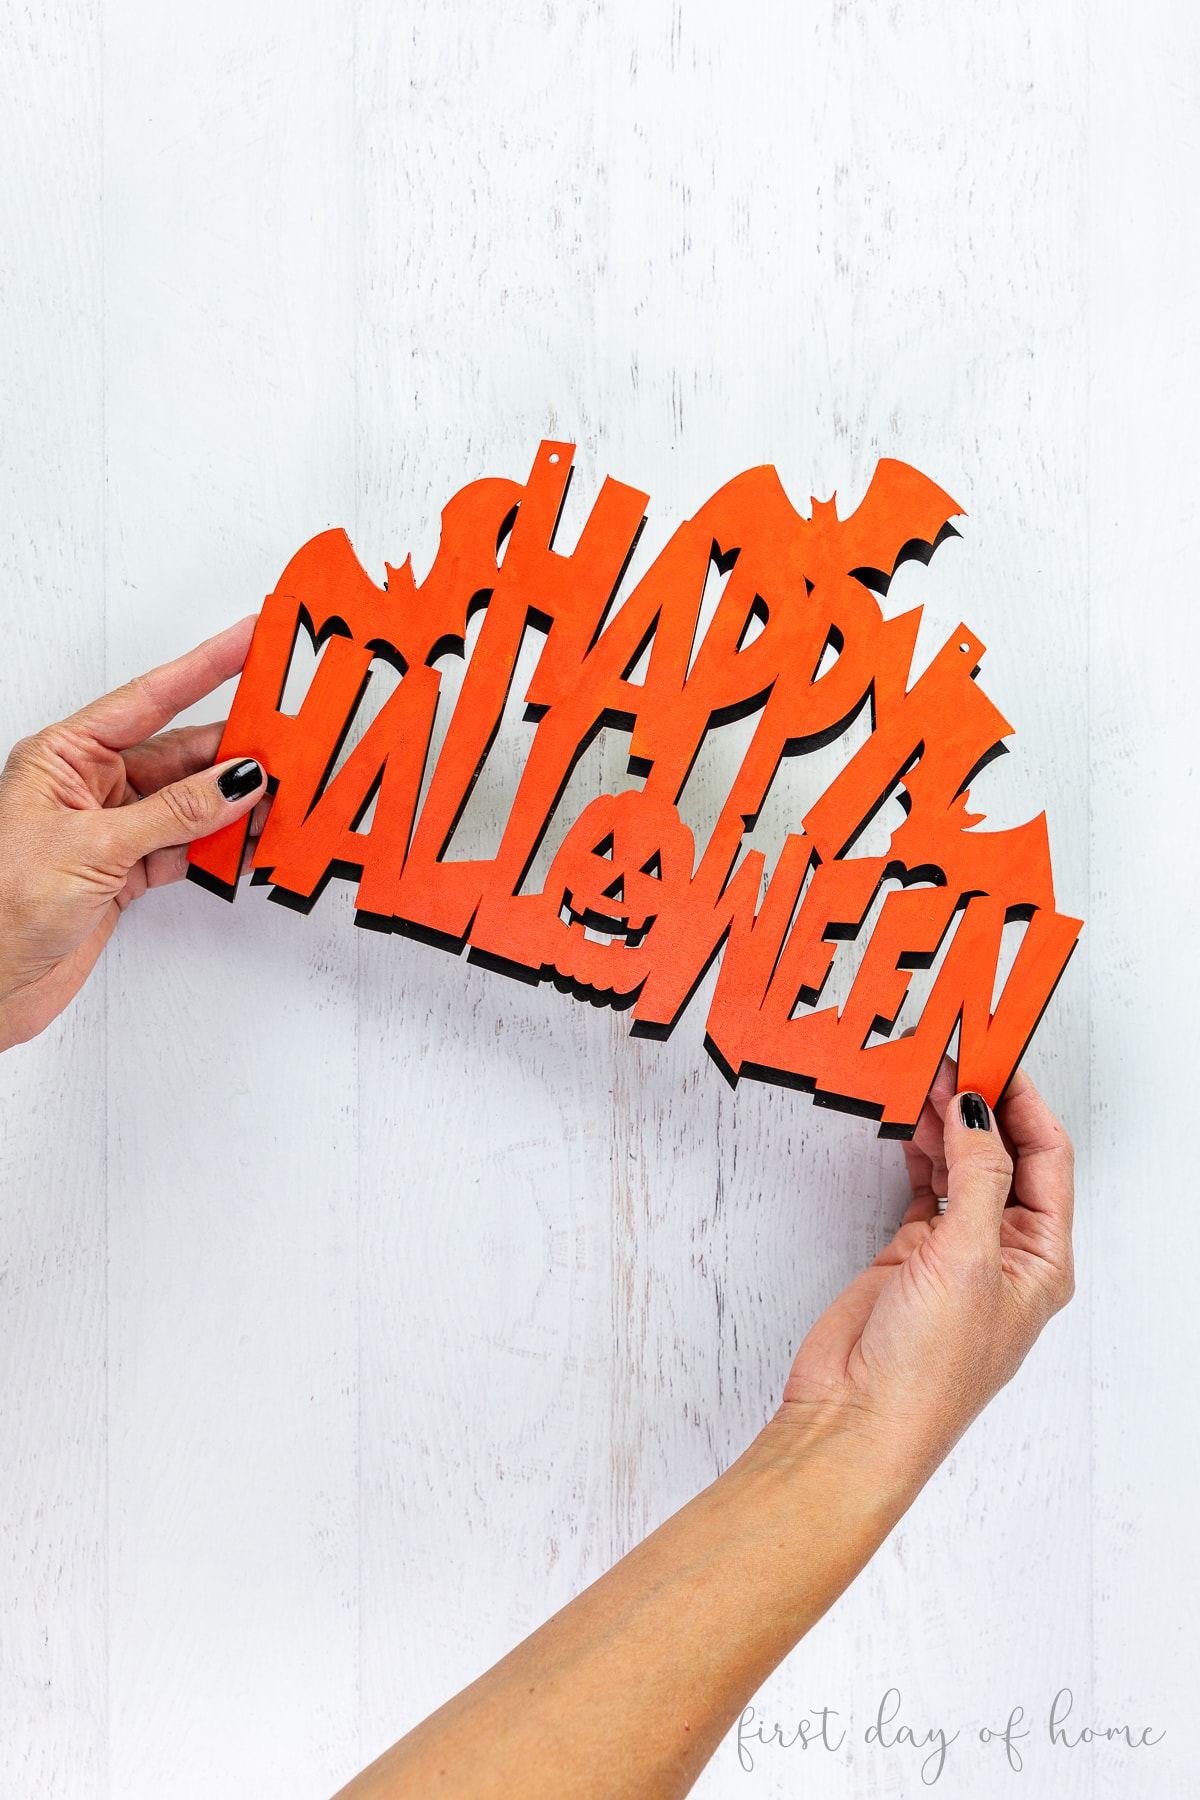 Wooden cutout with phrase "Happy Halloween"